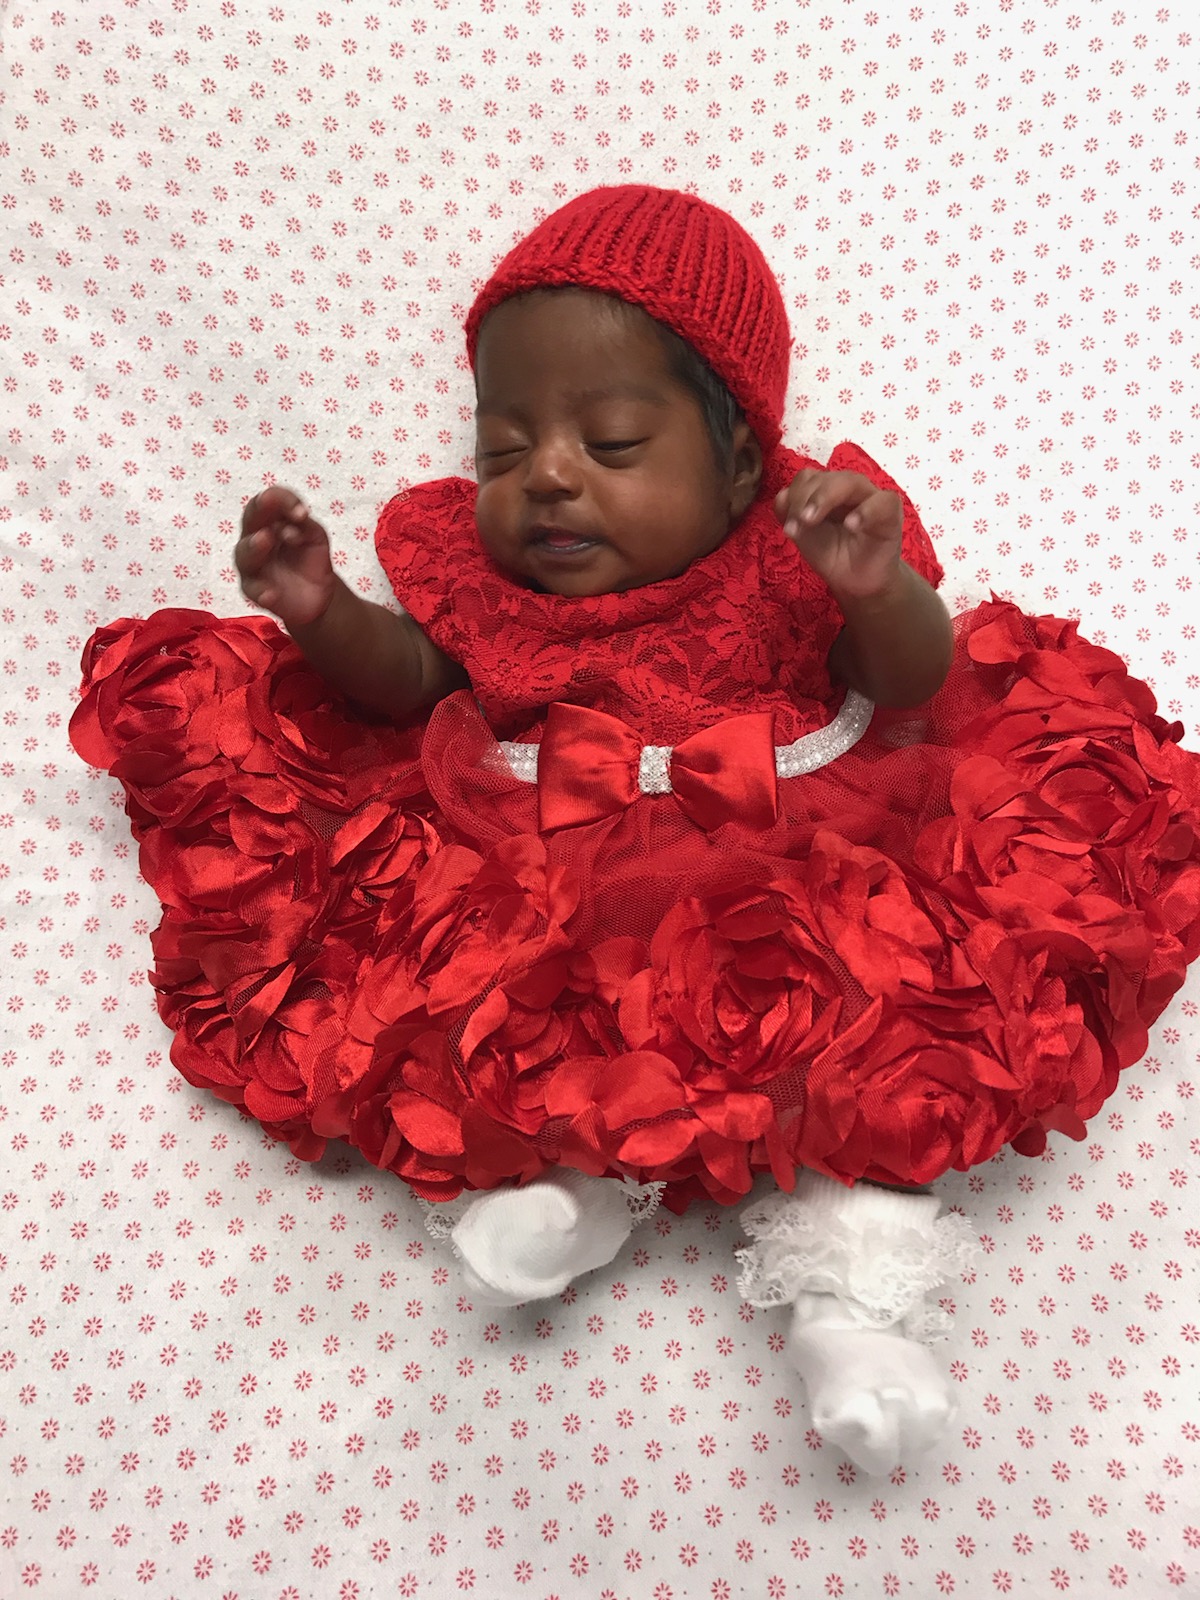 Mercy Newborns Wear Red Knit Hats during American Heart